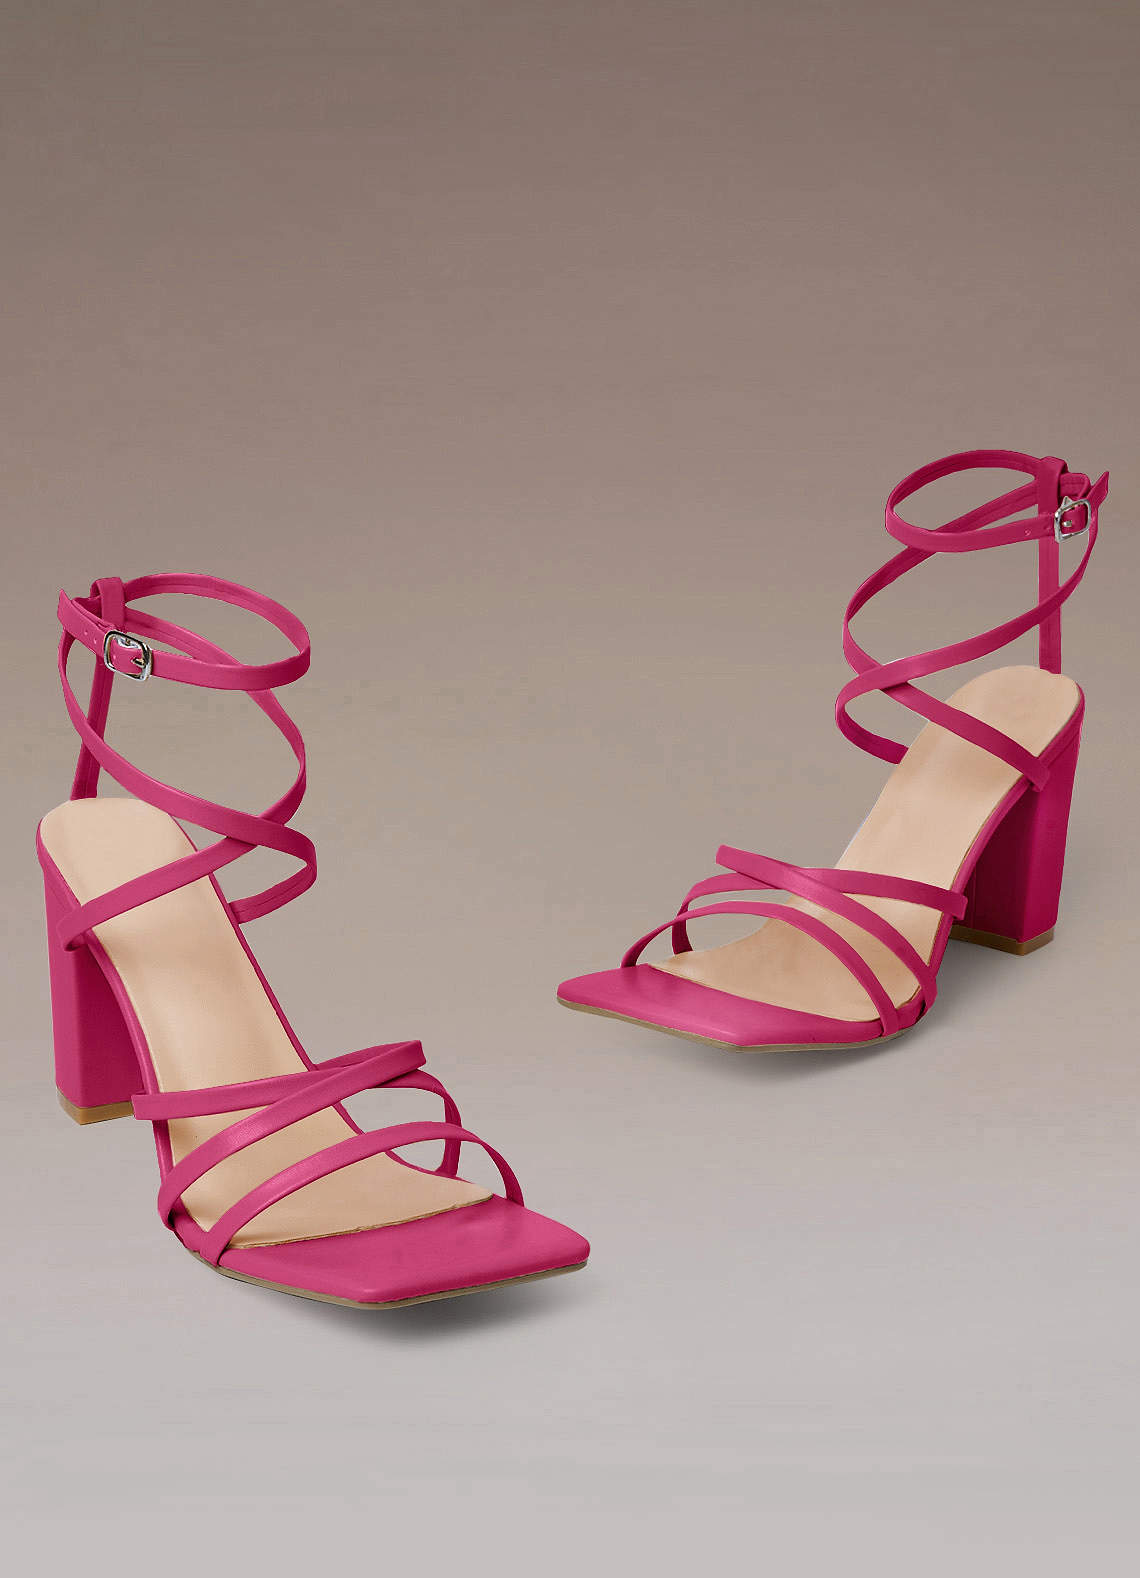 Hot Pink Cross Strappy Ankle Strap Heels